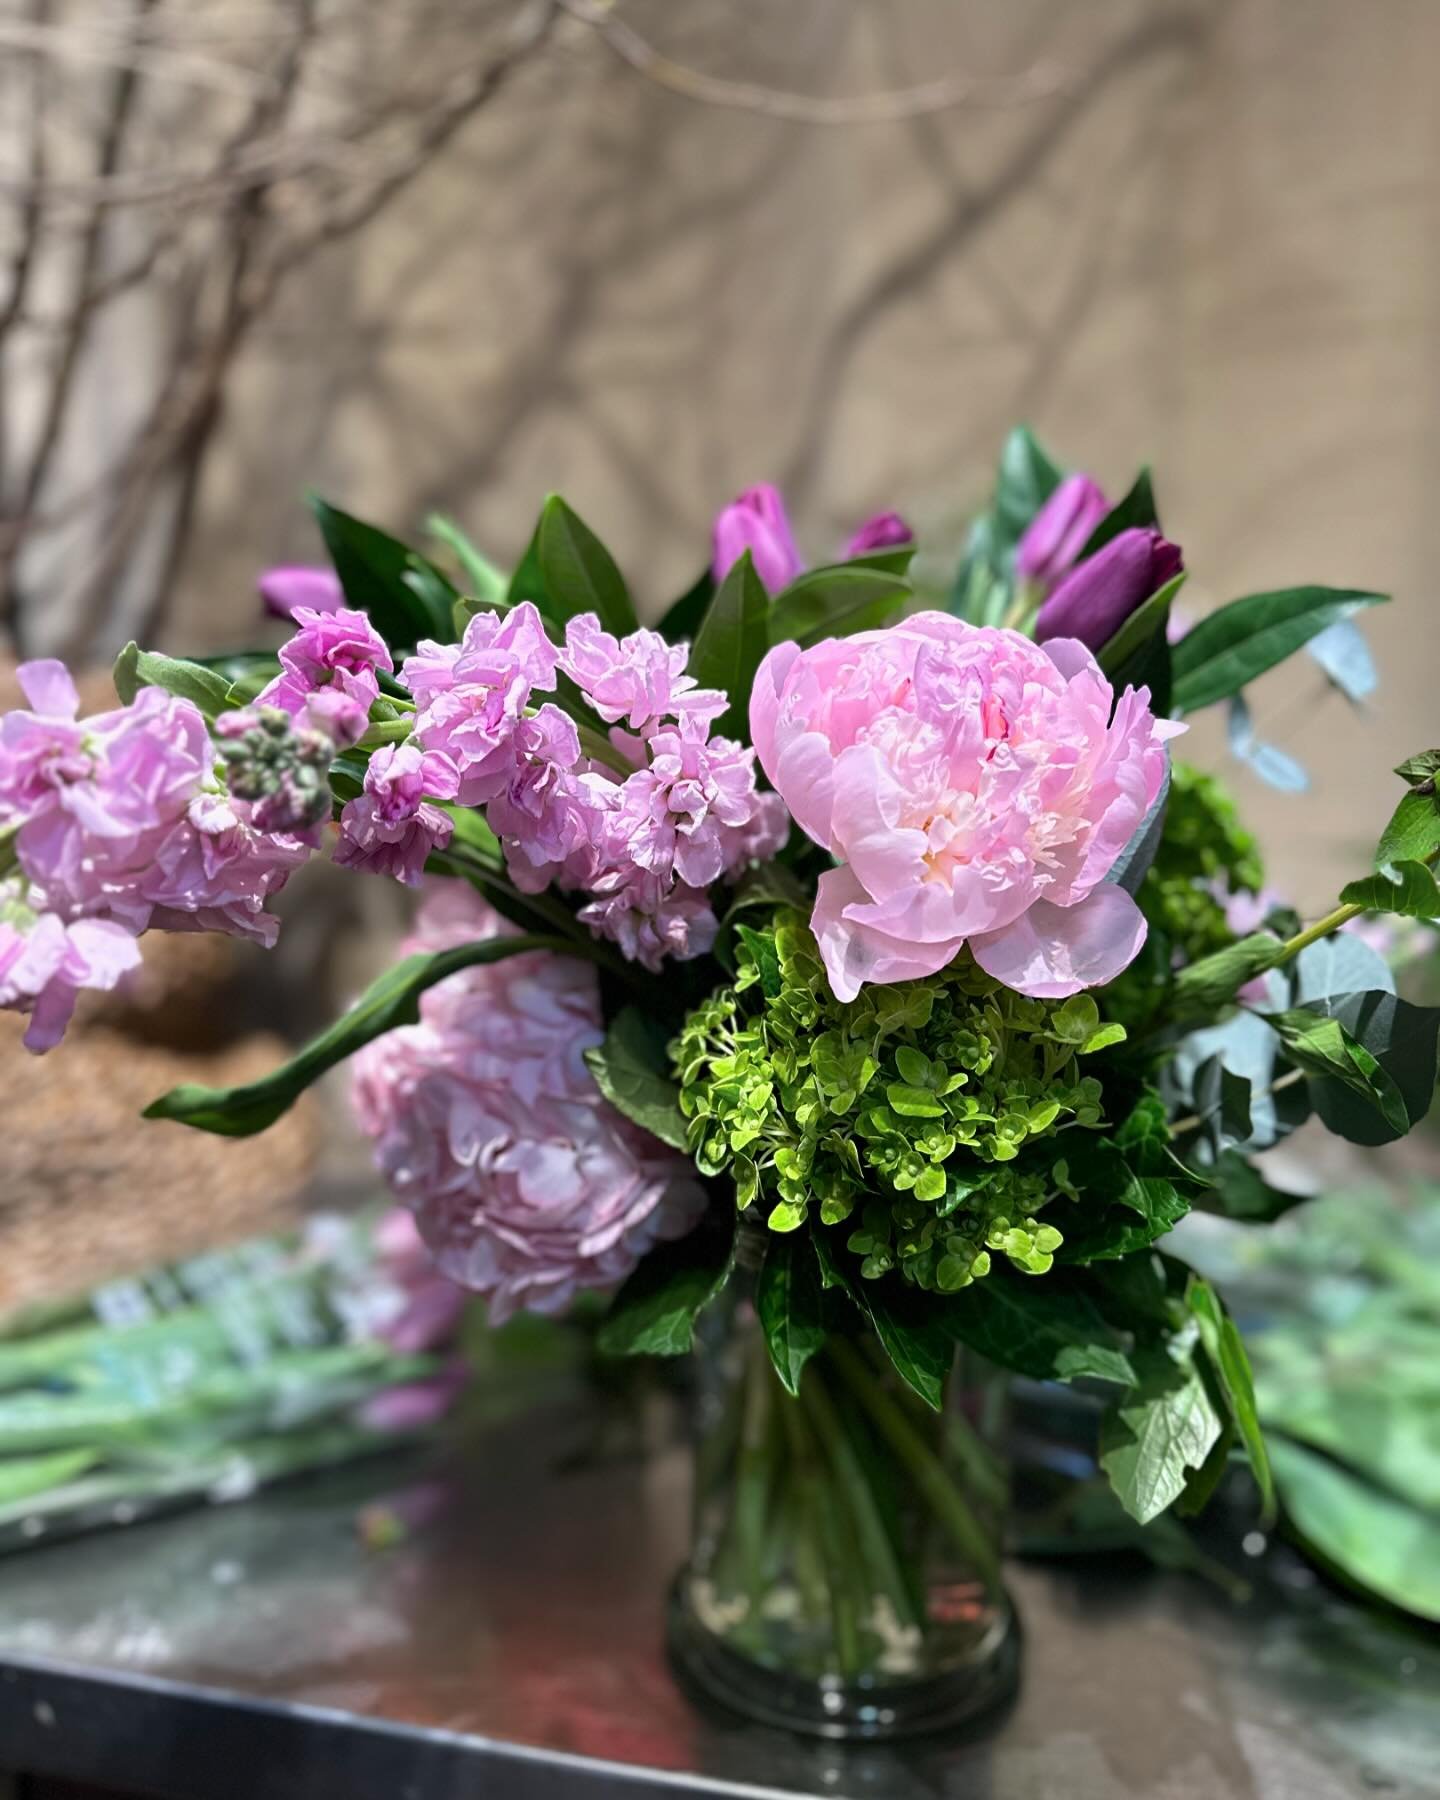 Peonies, stocks, tulips, hydrangeas&hellip; what else could mom want?